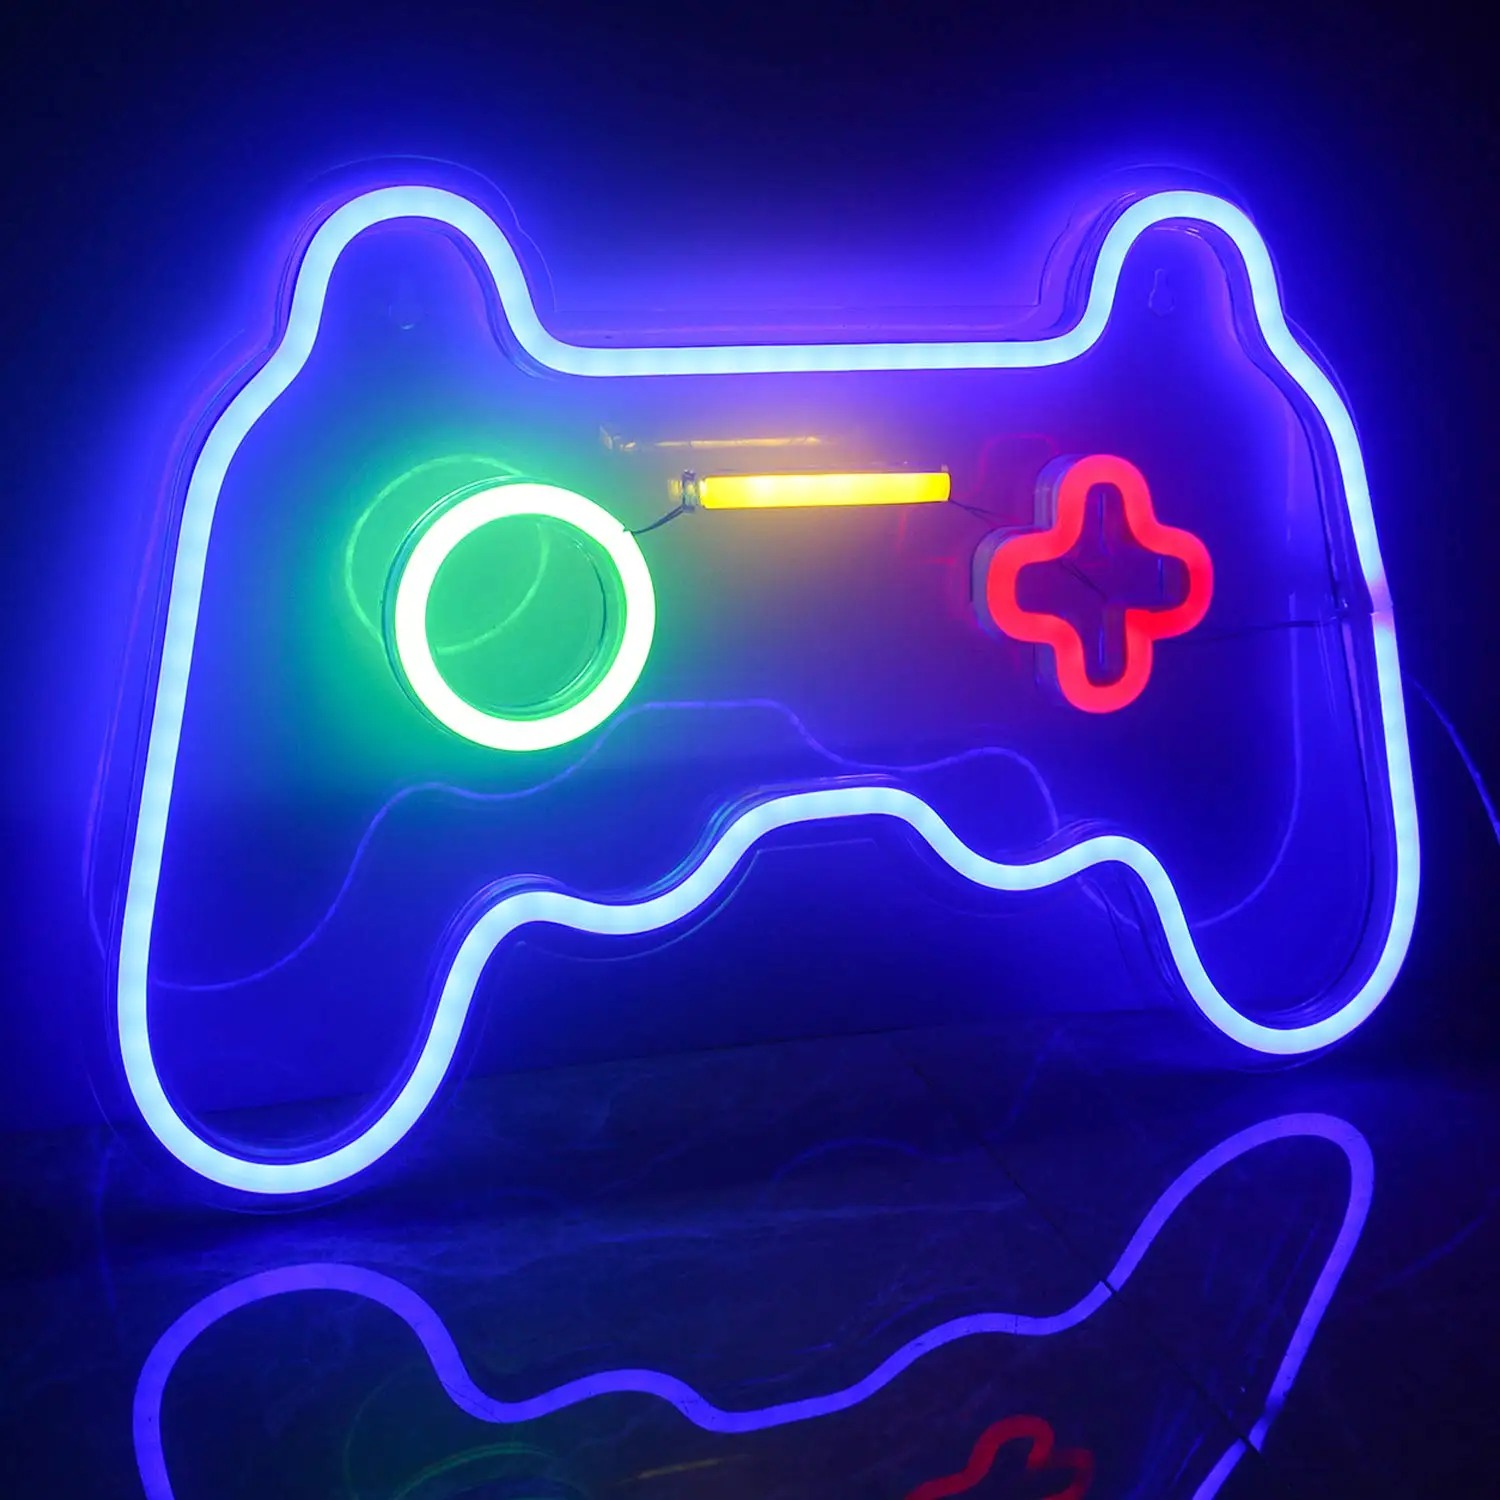 https://ae01.alicdn.com/kf/S145338d1dd9f4cabab7bd89a45581fb5Q/Game-Shaped-Neon-Signs-Neon-Lights-LED-Neon-Signs-for-Wall-Decor-16-x-11-Gamepad.jpg